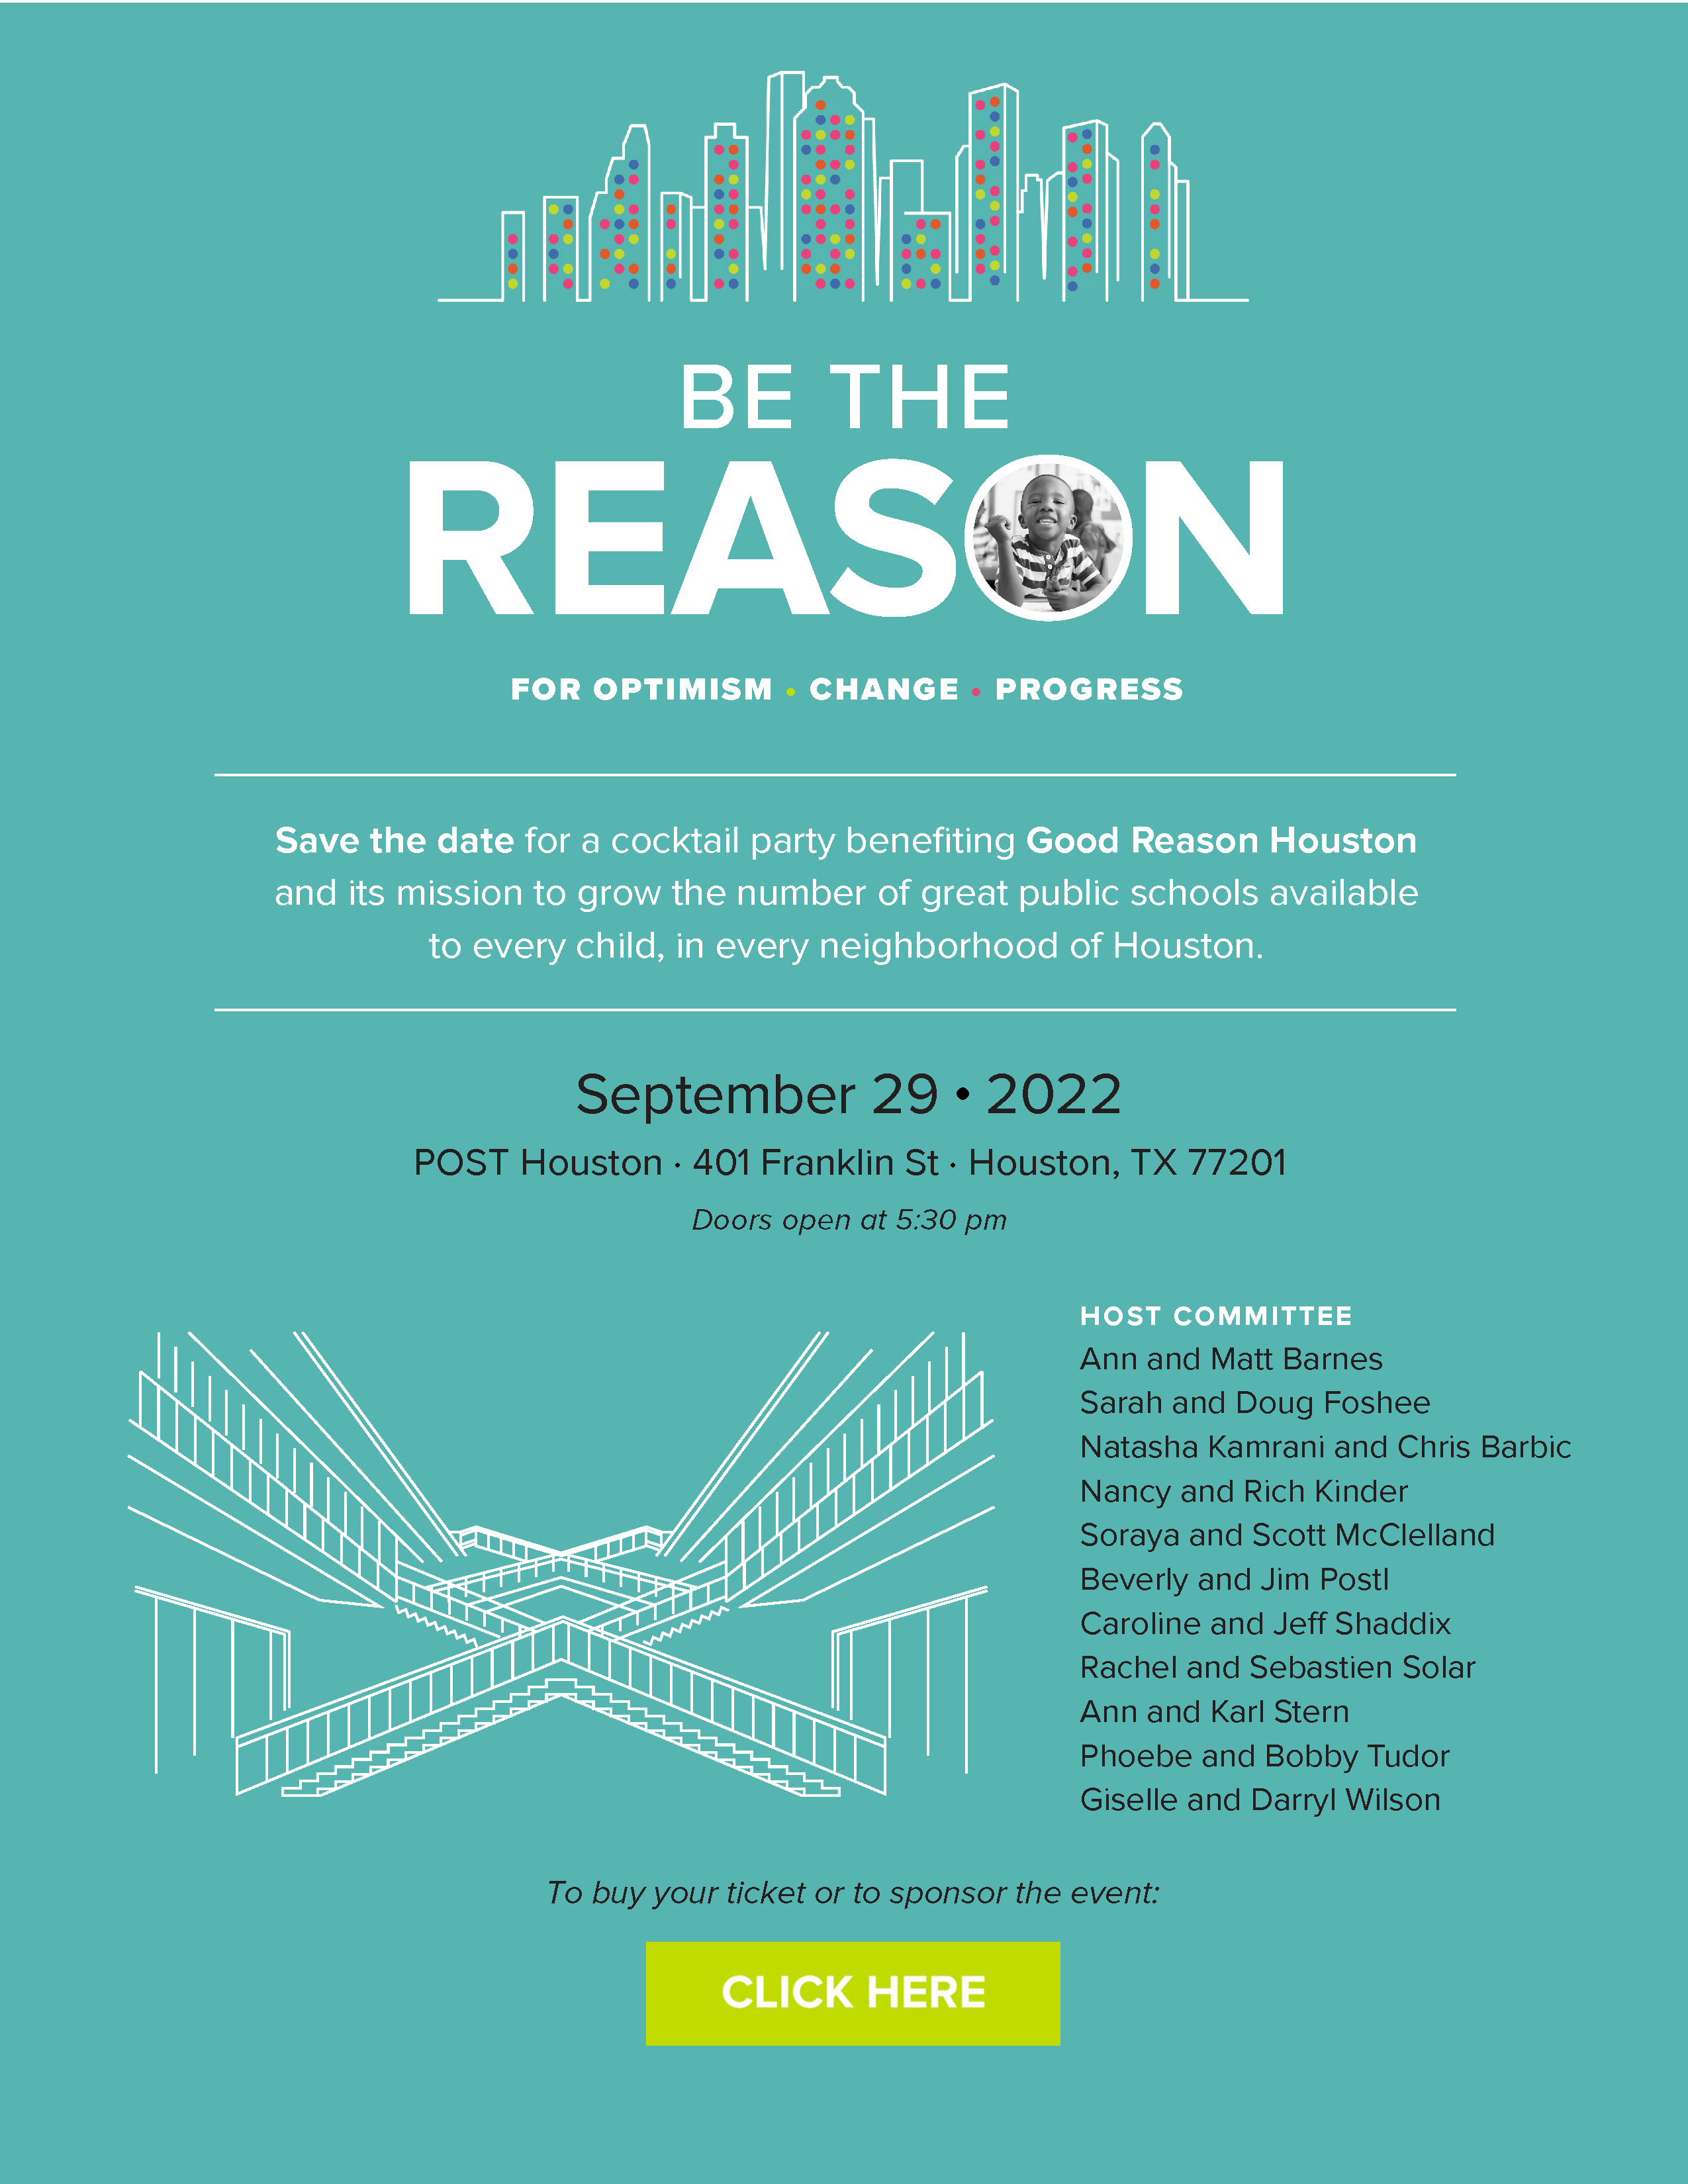 Be the Reason Event